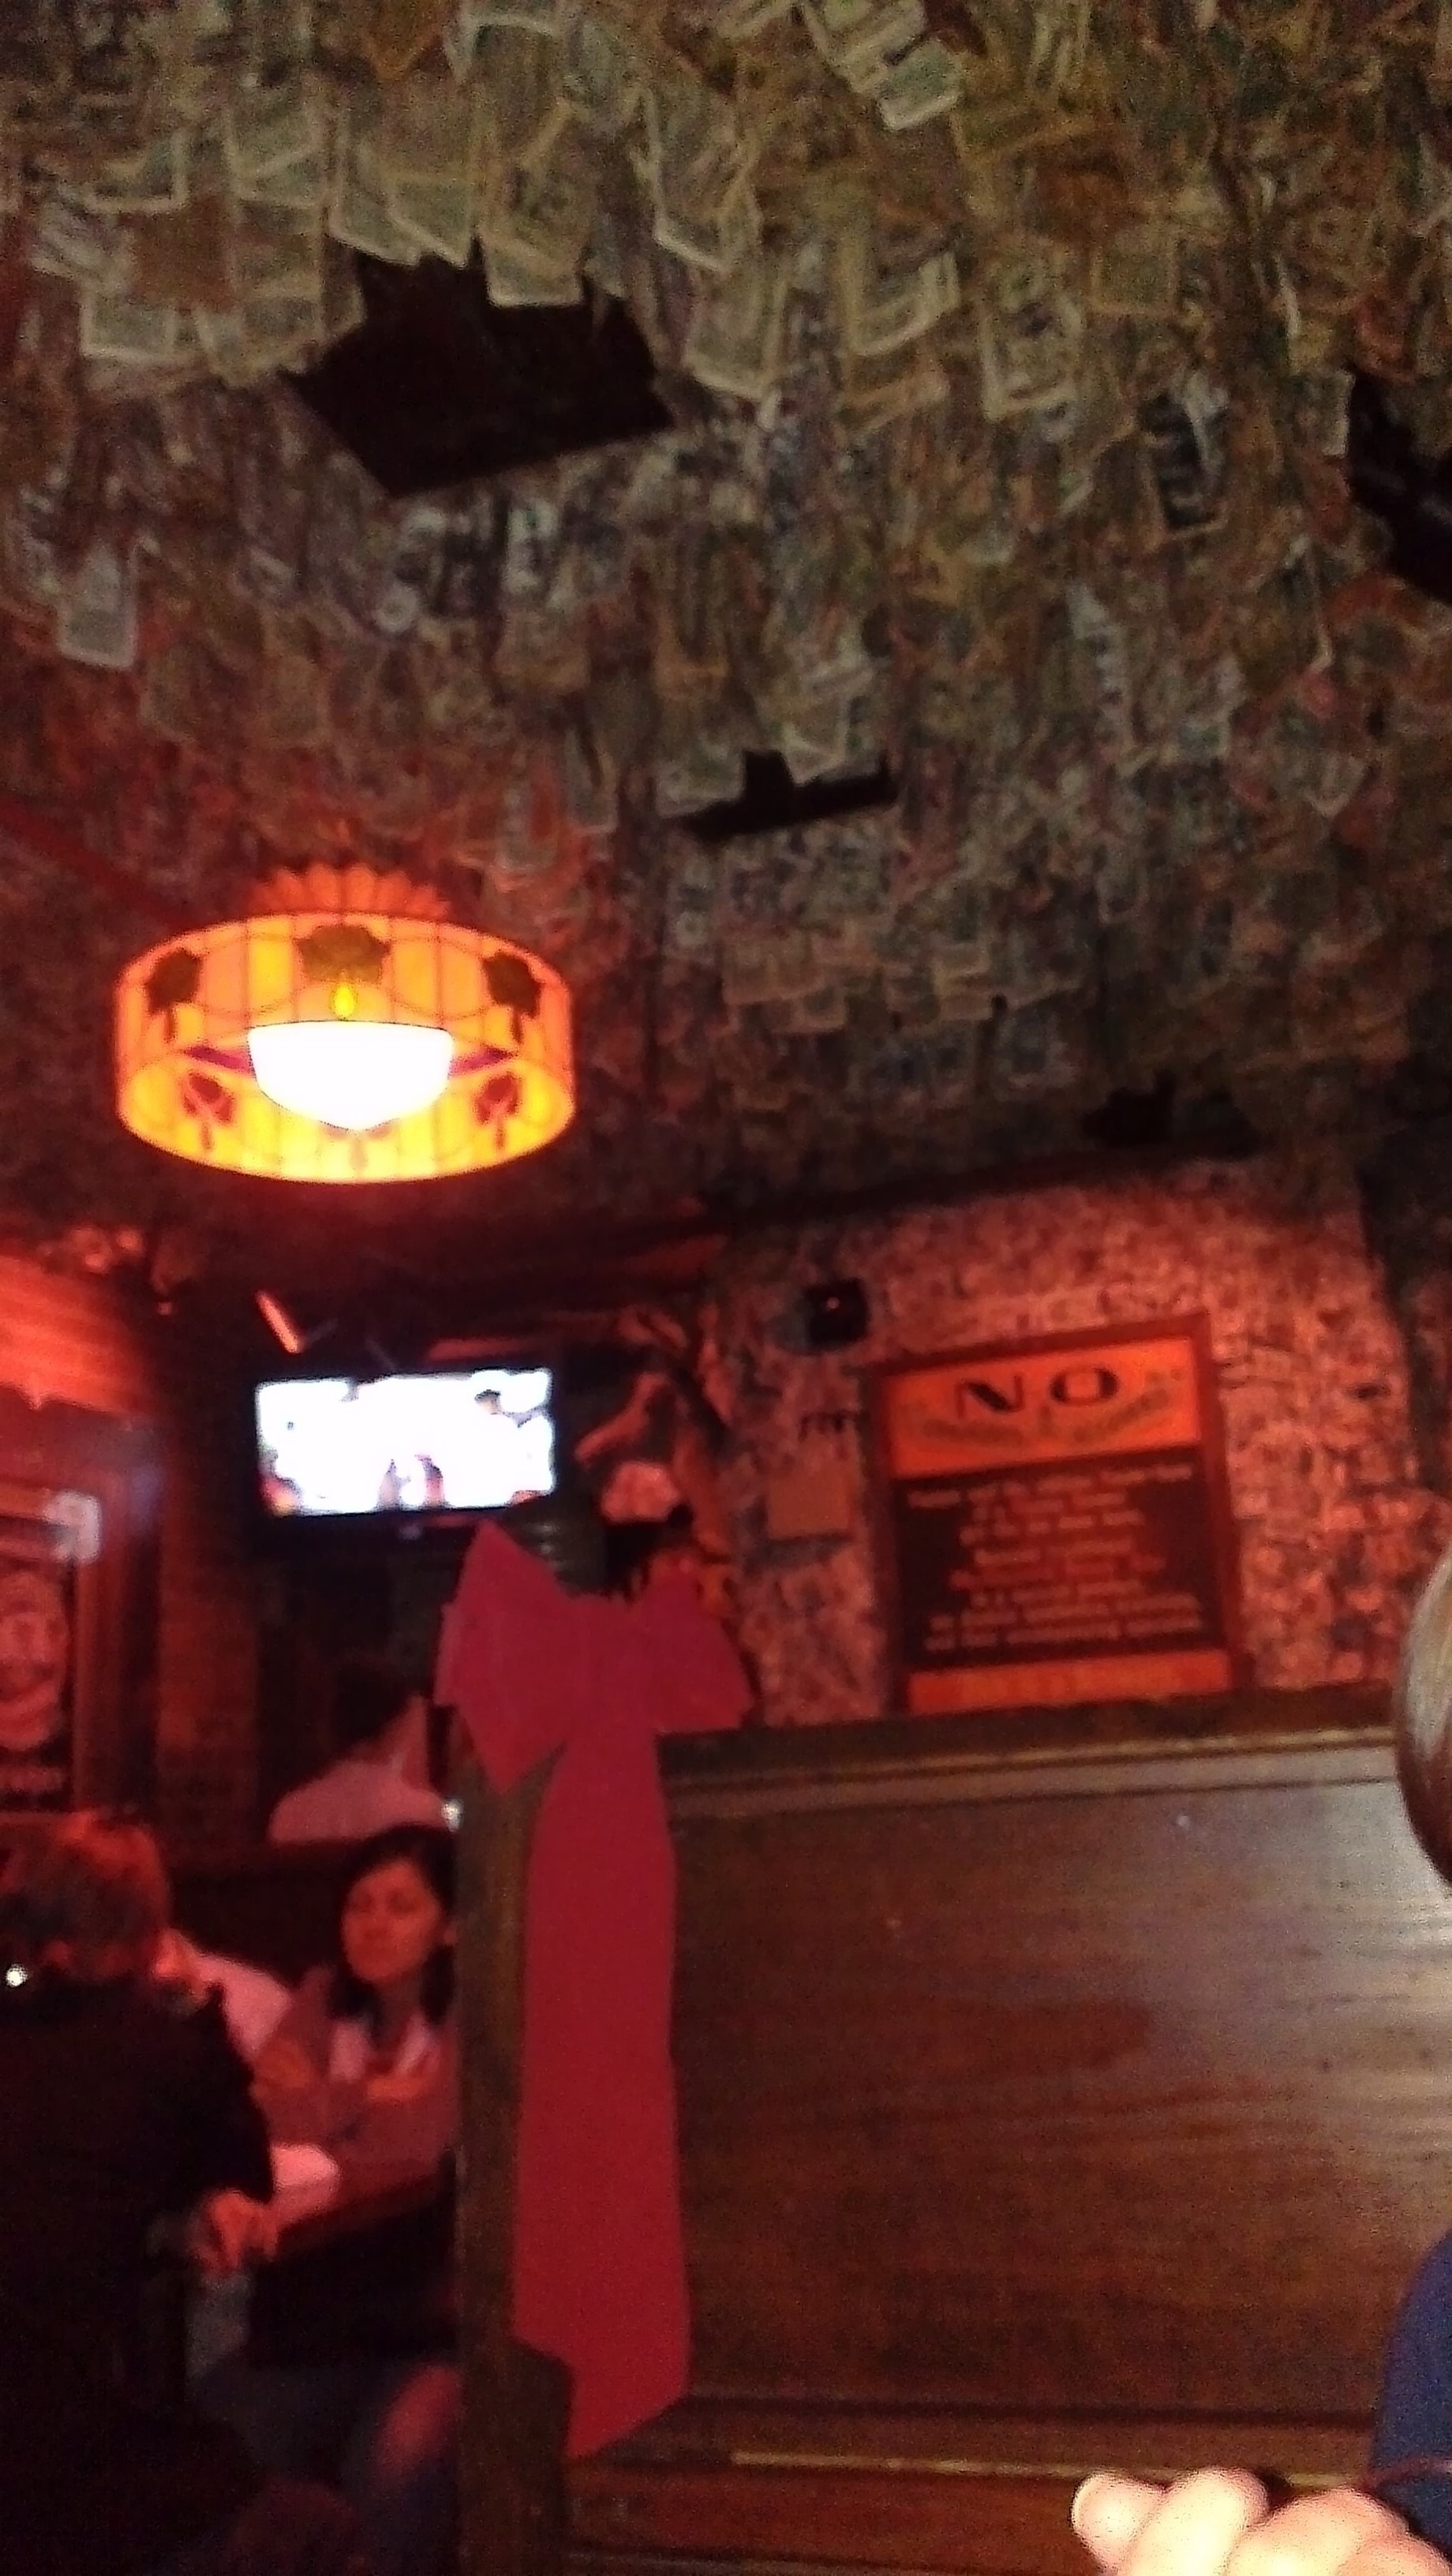 At McGuire's Irish Pub in Pensacola, Florida, you'll find over a million autographed dollar bills hanging from the ceiling.